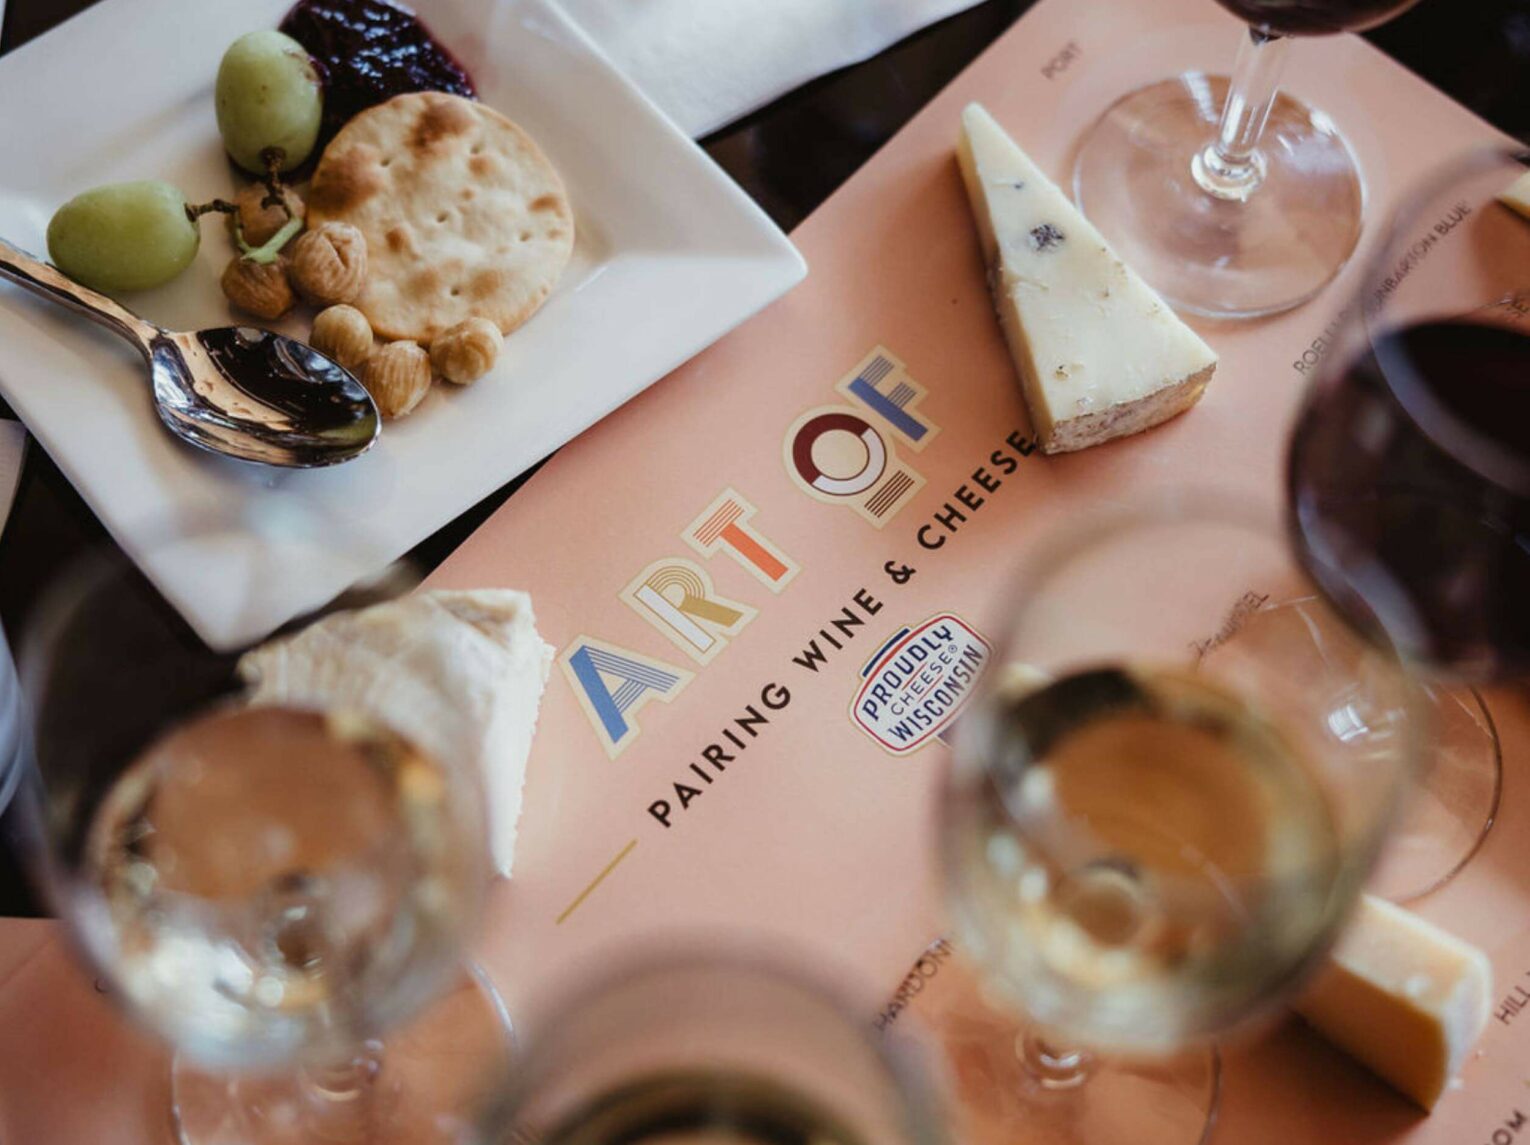 Wine and cheese pairing at the Art of Wine and Cheese